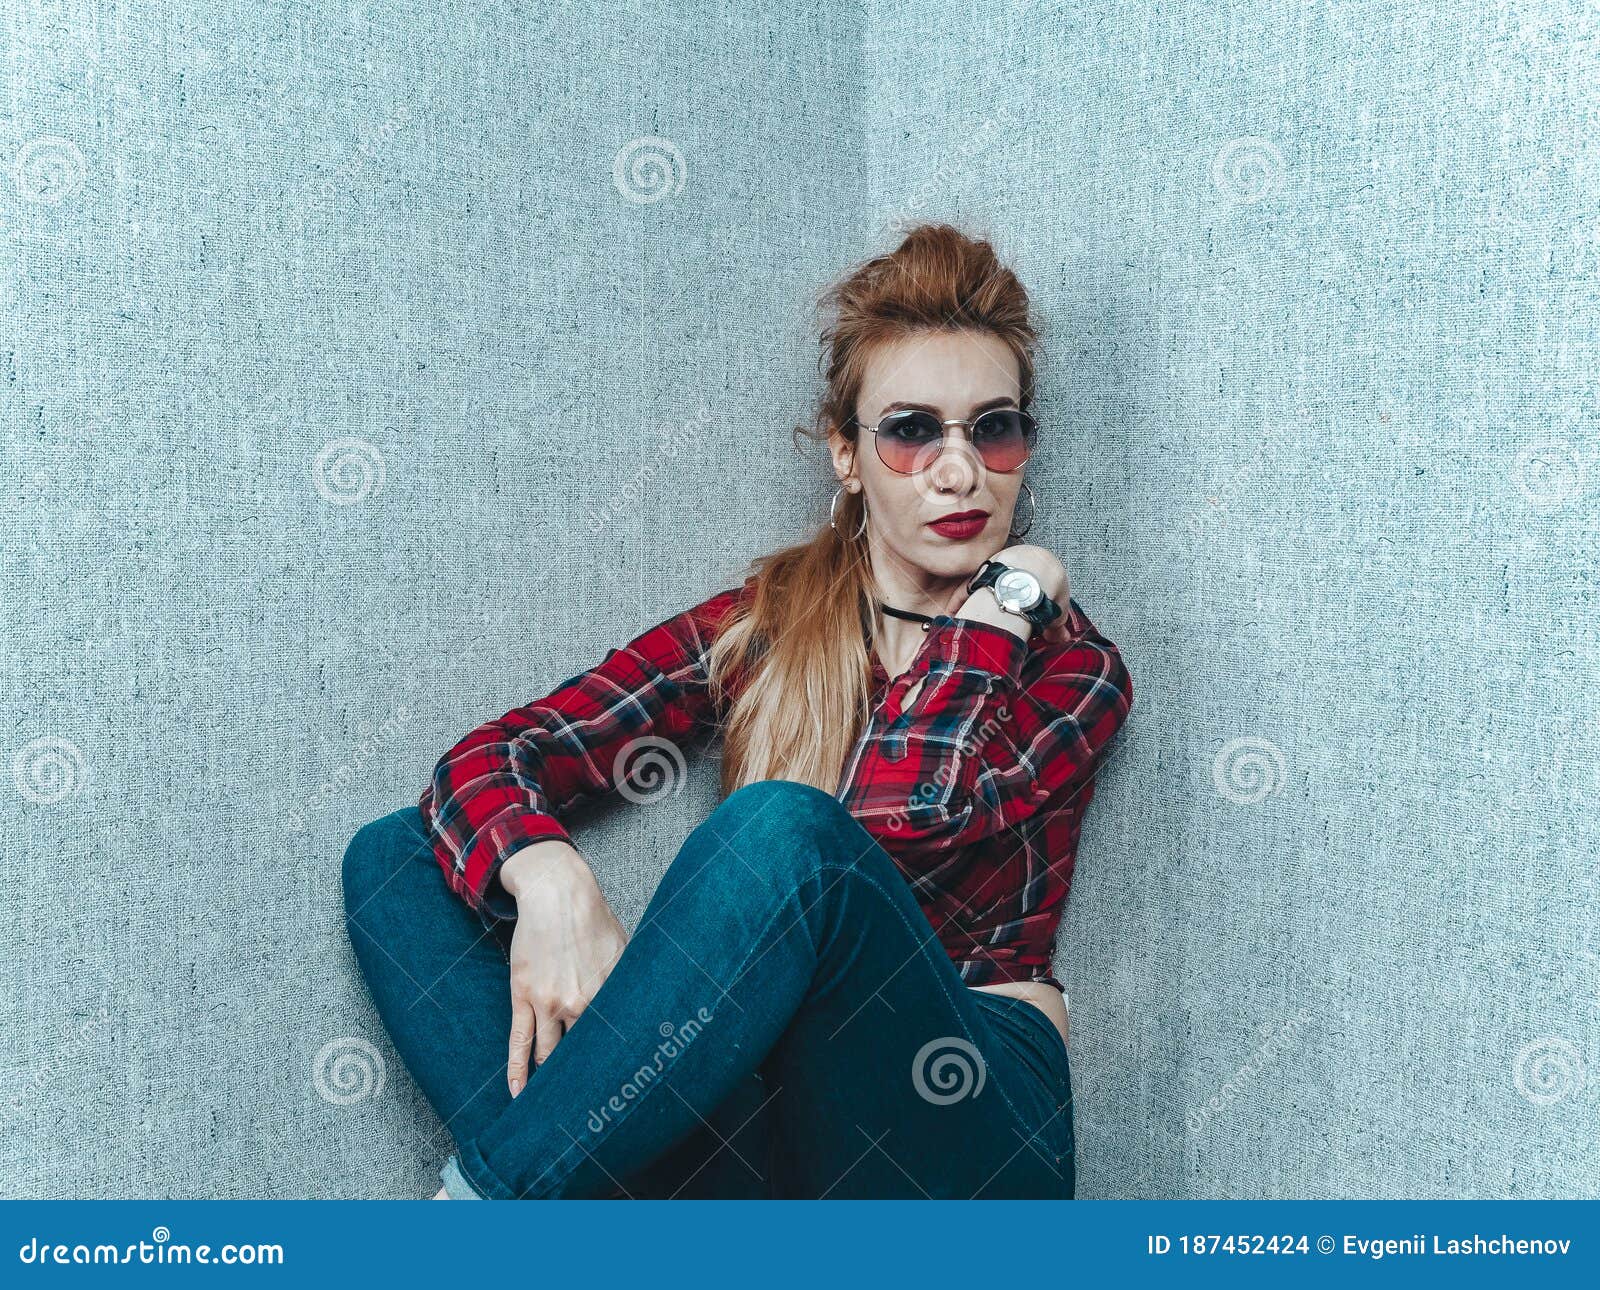 A Beautiful Girl in a Red Shirt with Glasses and with a Clock on Her Hand  Sits Near the Wall with Gray Wallpaper Stock Photo - Image of hipster,  emotion: 187452424